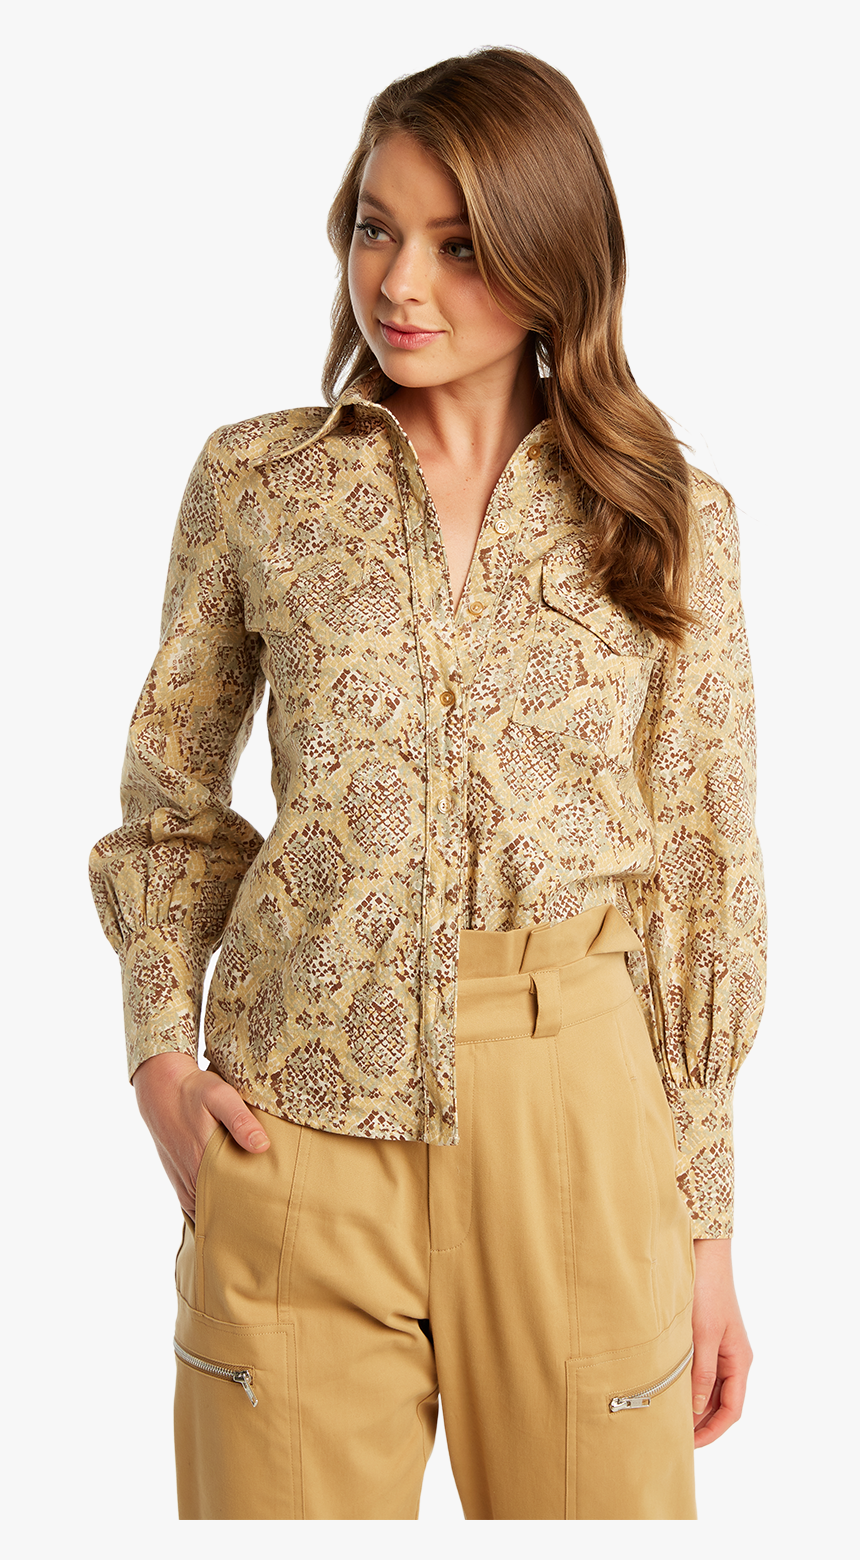 Snake Button Shirt In Colour Appleblossom - Photo Shoot, HD Png Download, Free Download